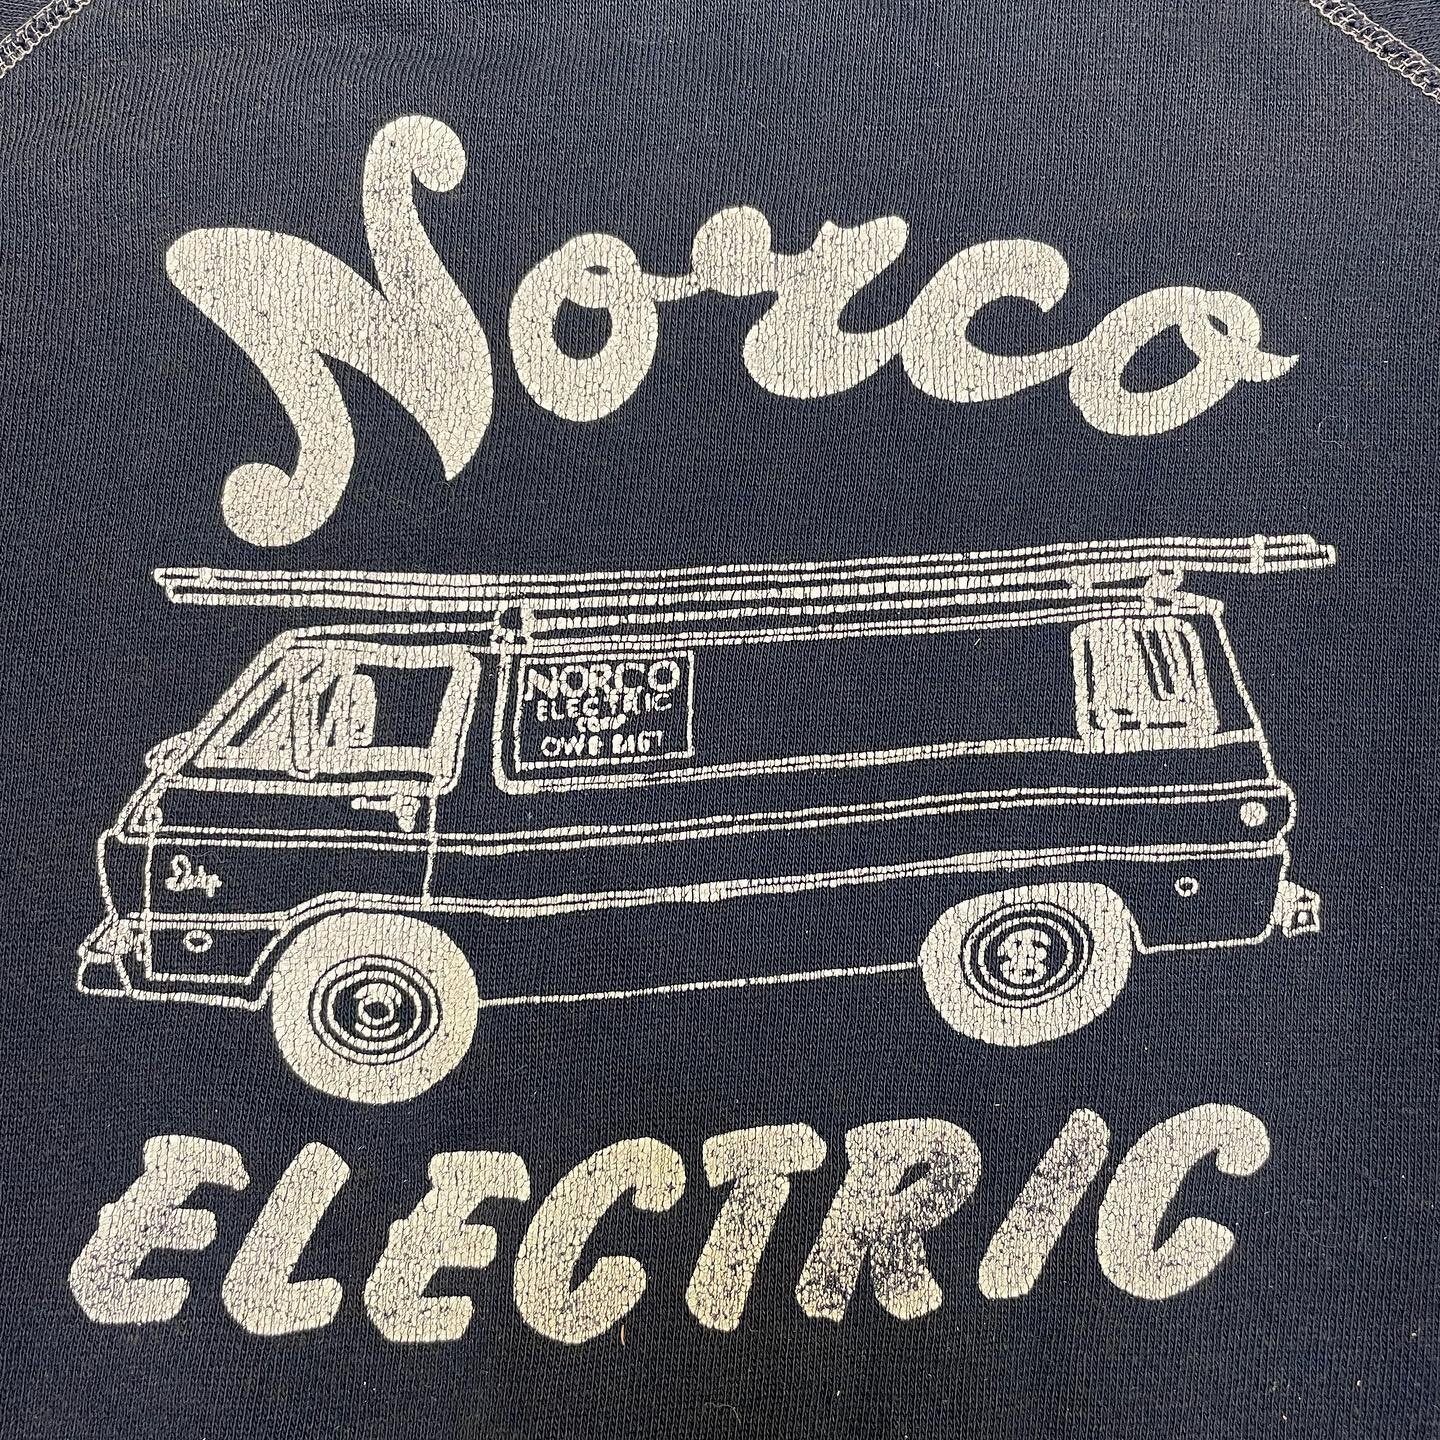 Older sweater logo turned to a high resolution print for @norco__electric ✅ #norcoelectric #stickers #wraps #decals #vinylwrap #wrapped #custom #logo #kcustomdesign #kcustomz